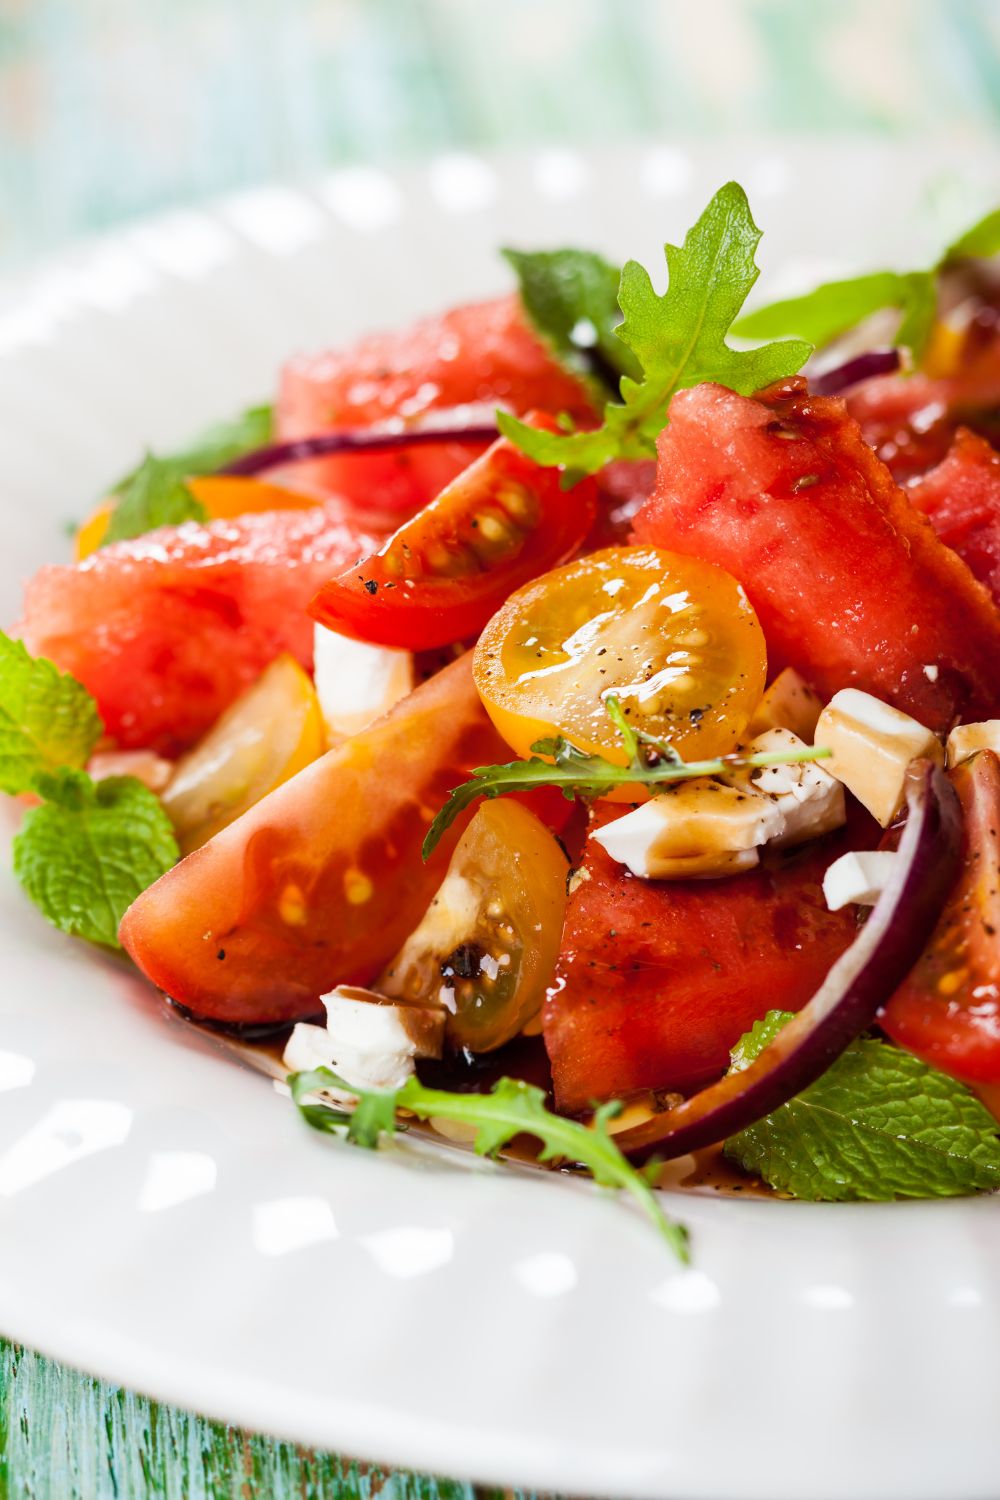 An heirloom tomato and watermelon salad in a white plate